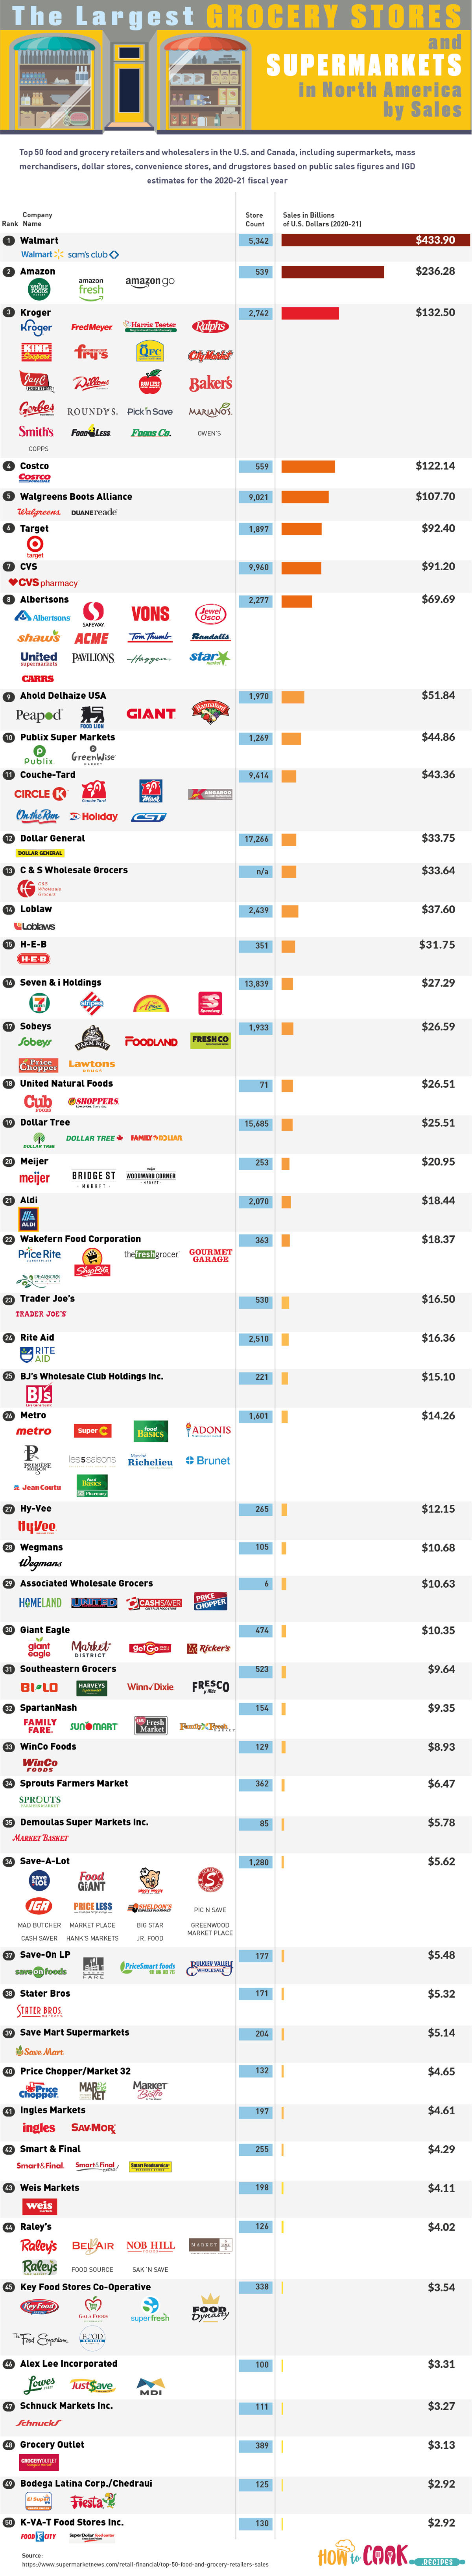 The Largest Grocery Stores and Supermarkets in North America by Sales